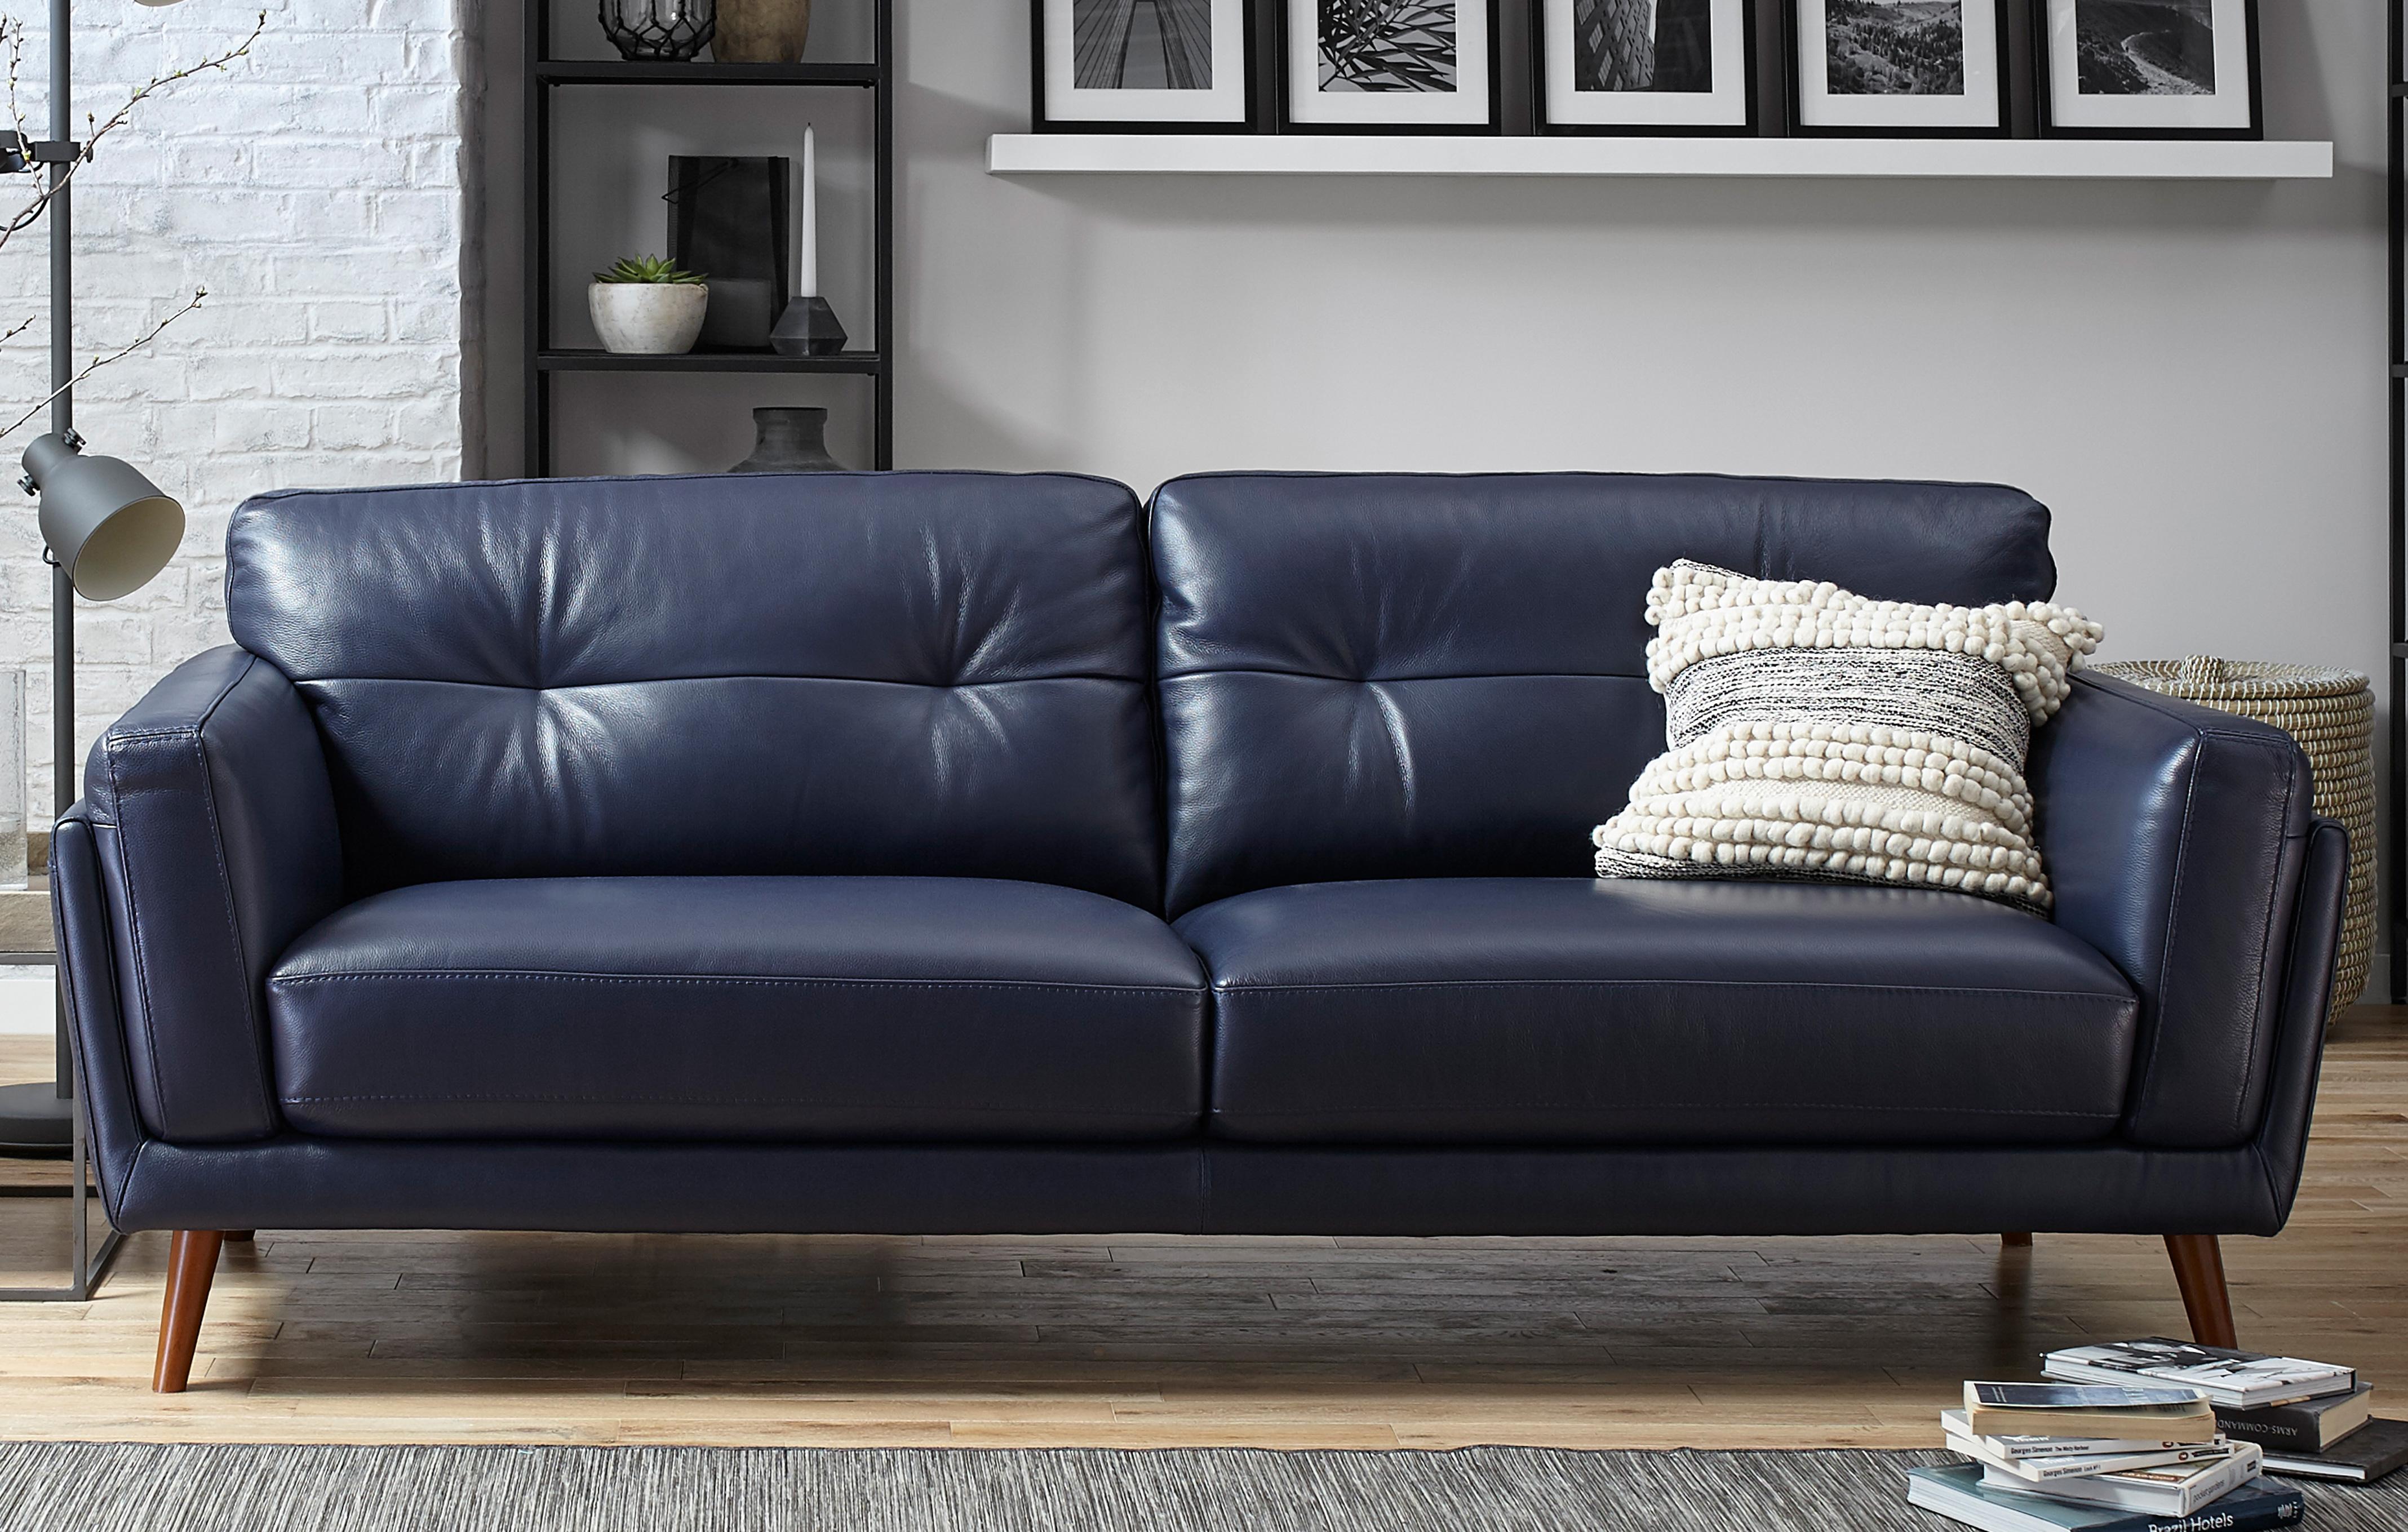 Være gambling Specialisere Leather Sofas | Chesterfield Sofas | Browse the Range | DFS